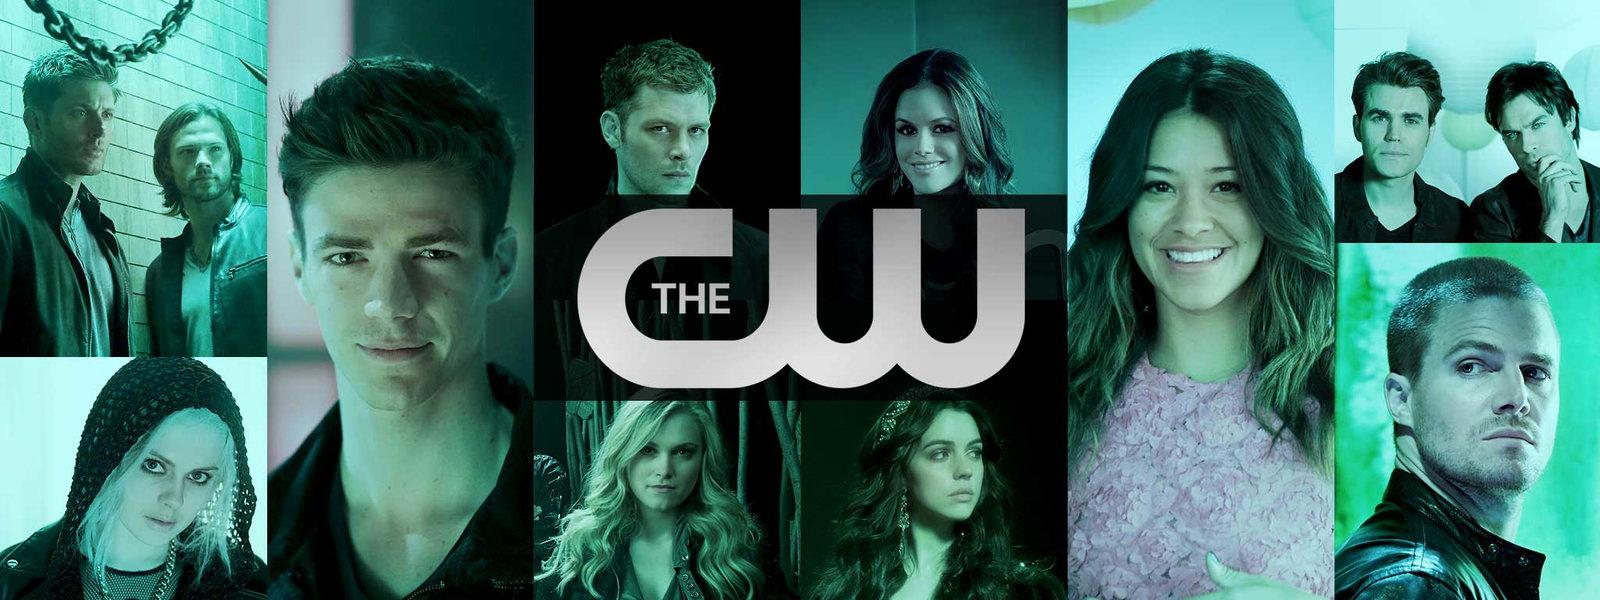 The CW prepares to launch subscription-free streaming